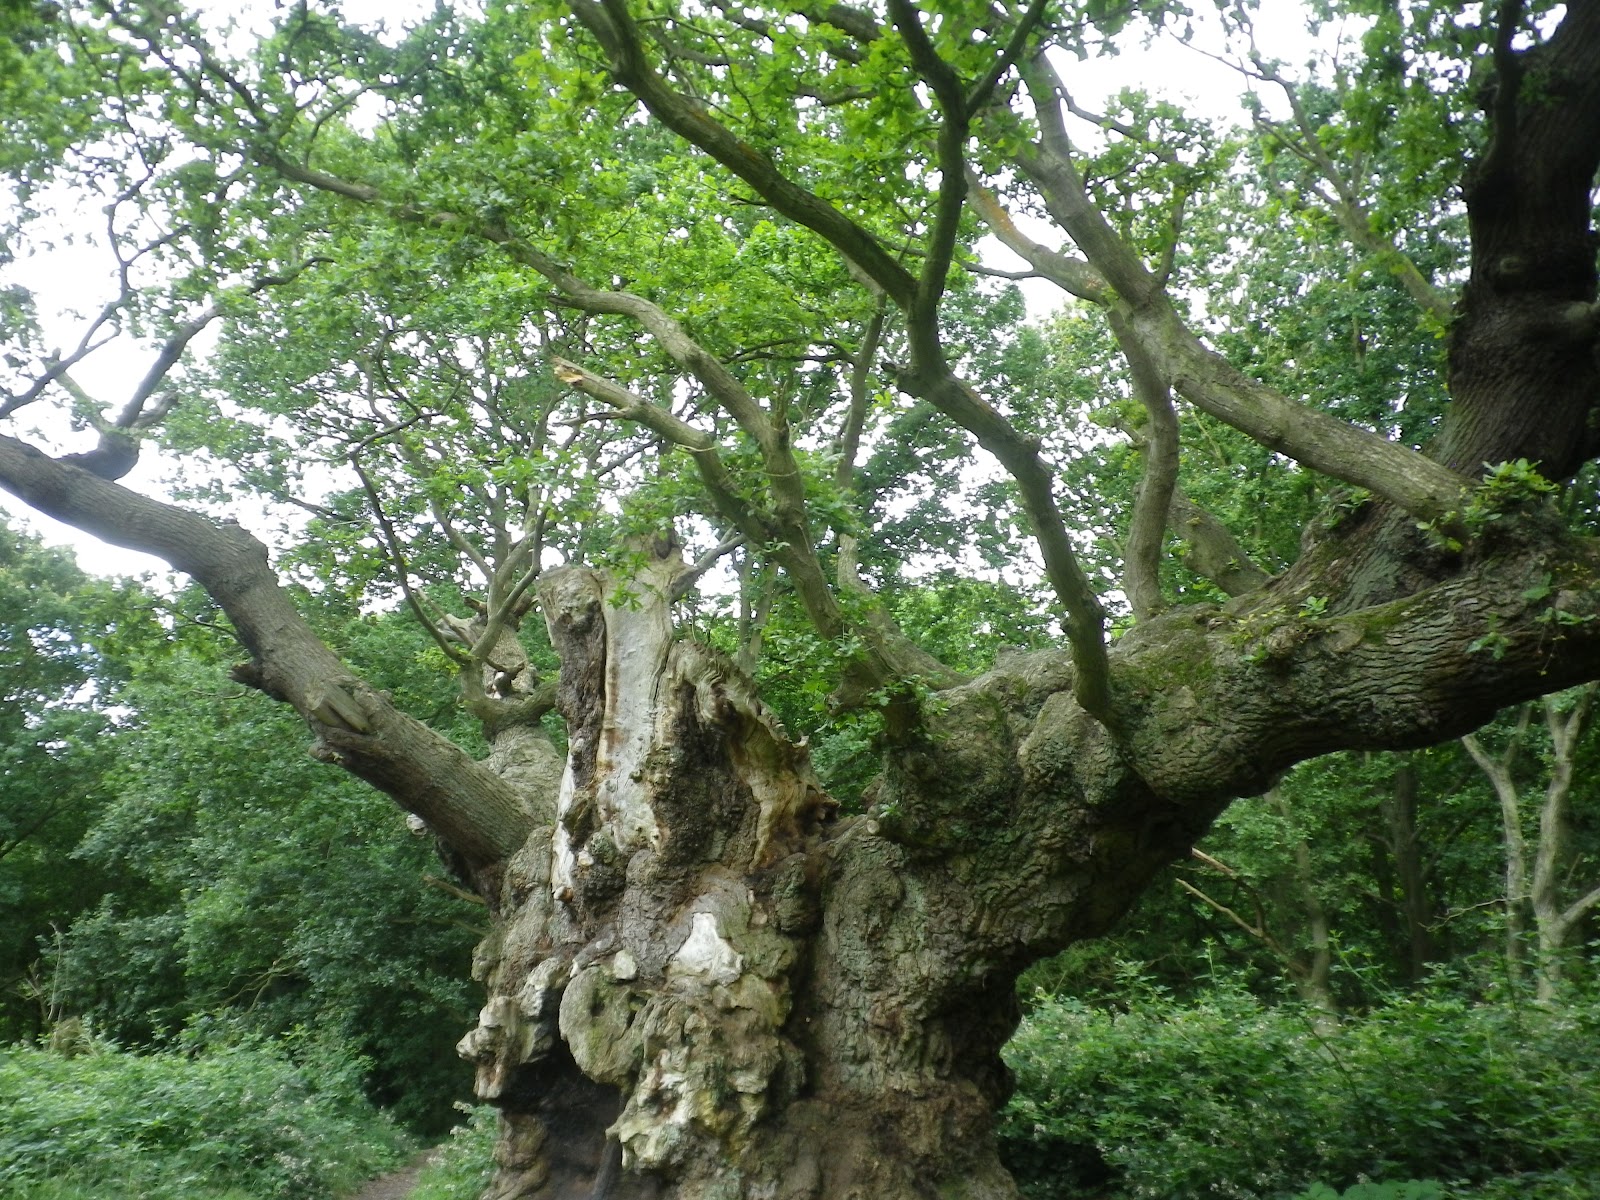 Necess City: Old Knobbley - A wise old tree in Essex